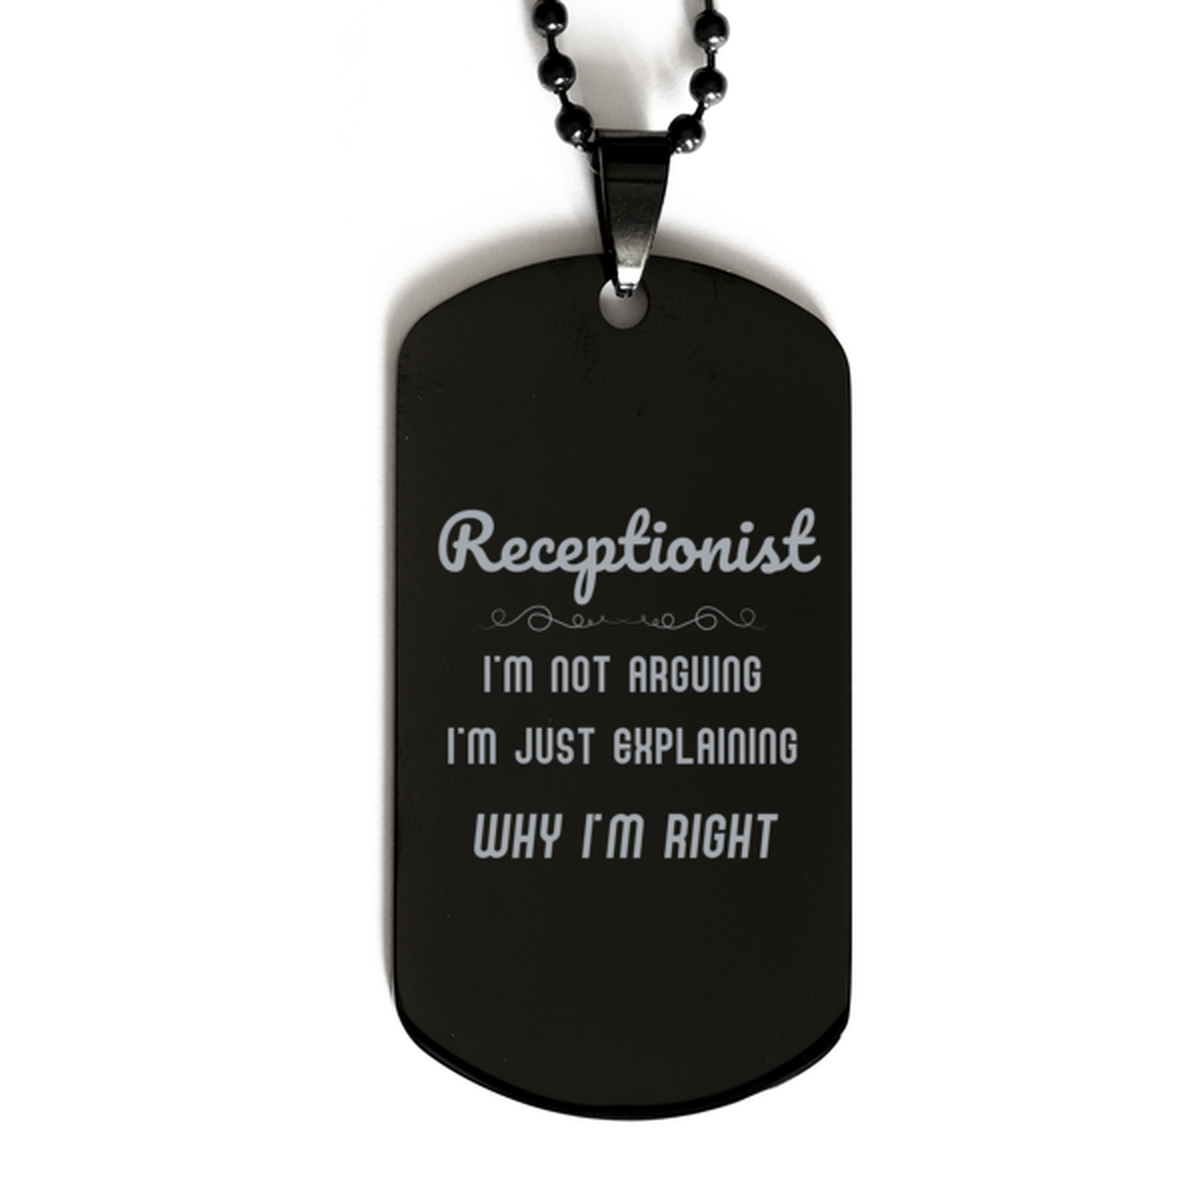 Receptionist I'm not Arguing. I'm Just Explaining Why I'm RIGHT Black Dog Tag, Funny Saying Quote Receptionist Gifts For Receptionist Graduation Birthday Christmas Gifts for Men Women Coworker